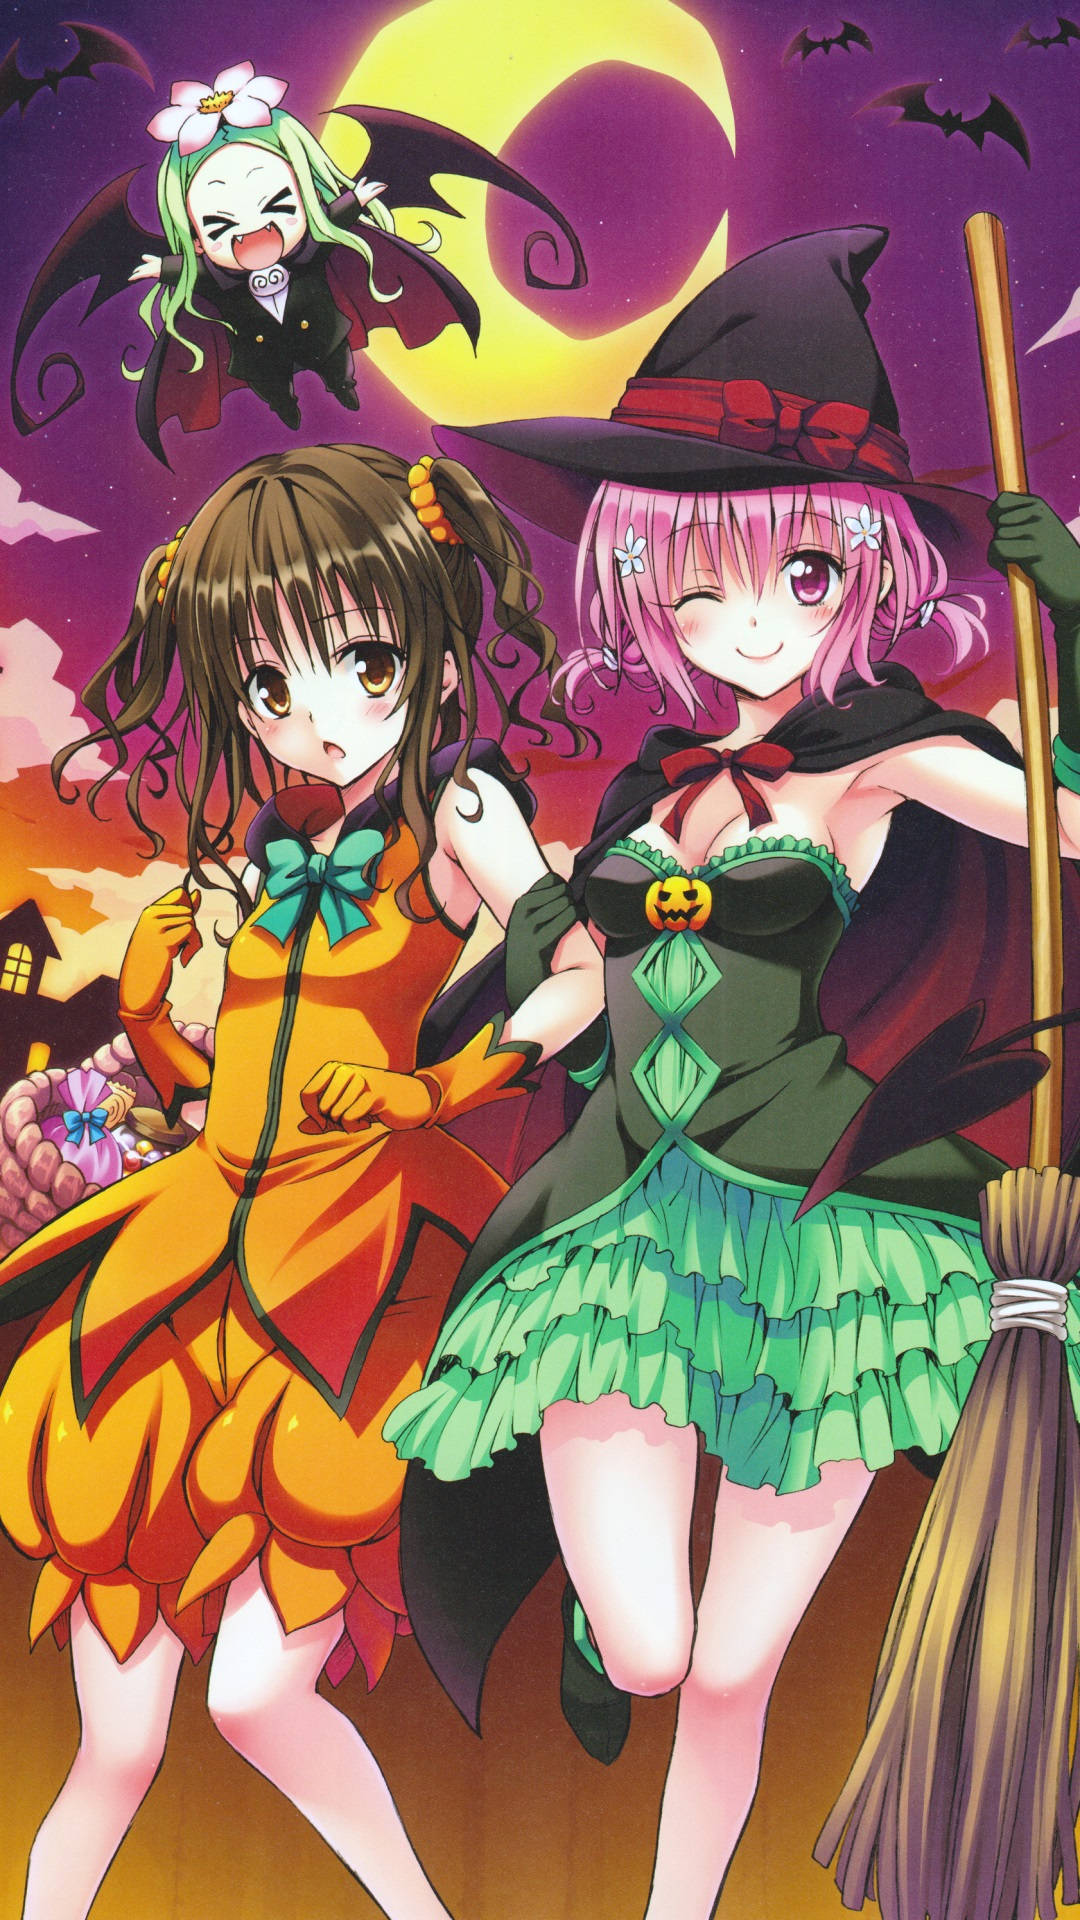 Celebrate Halloween with your favorite anime characters! Wallpaper